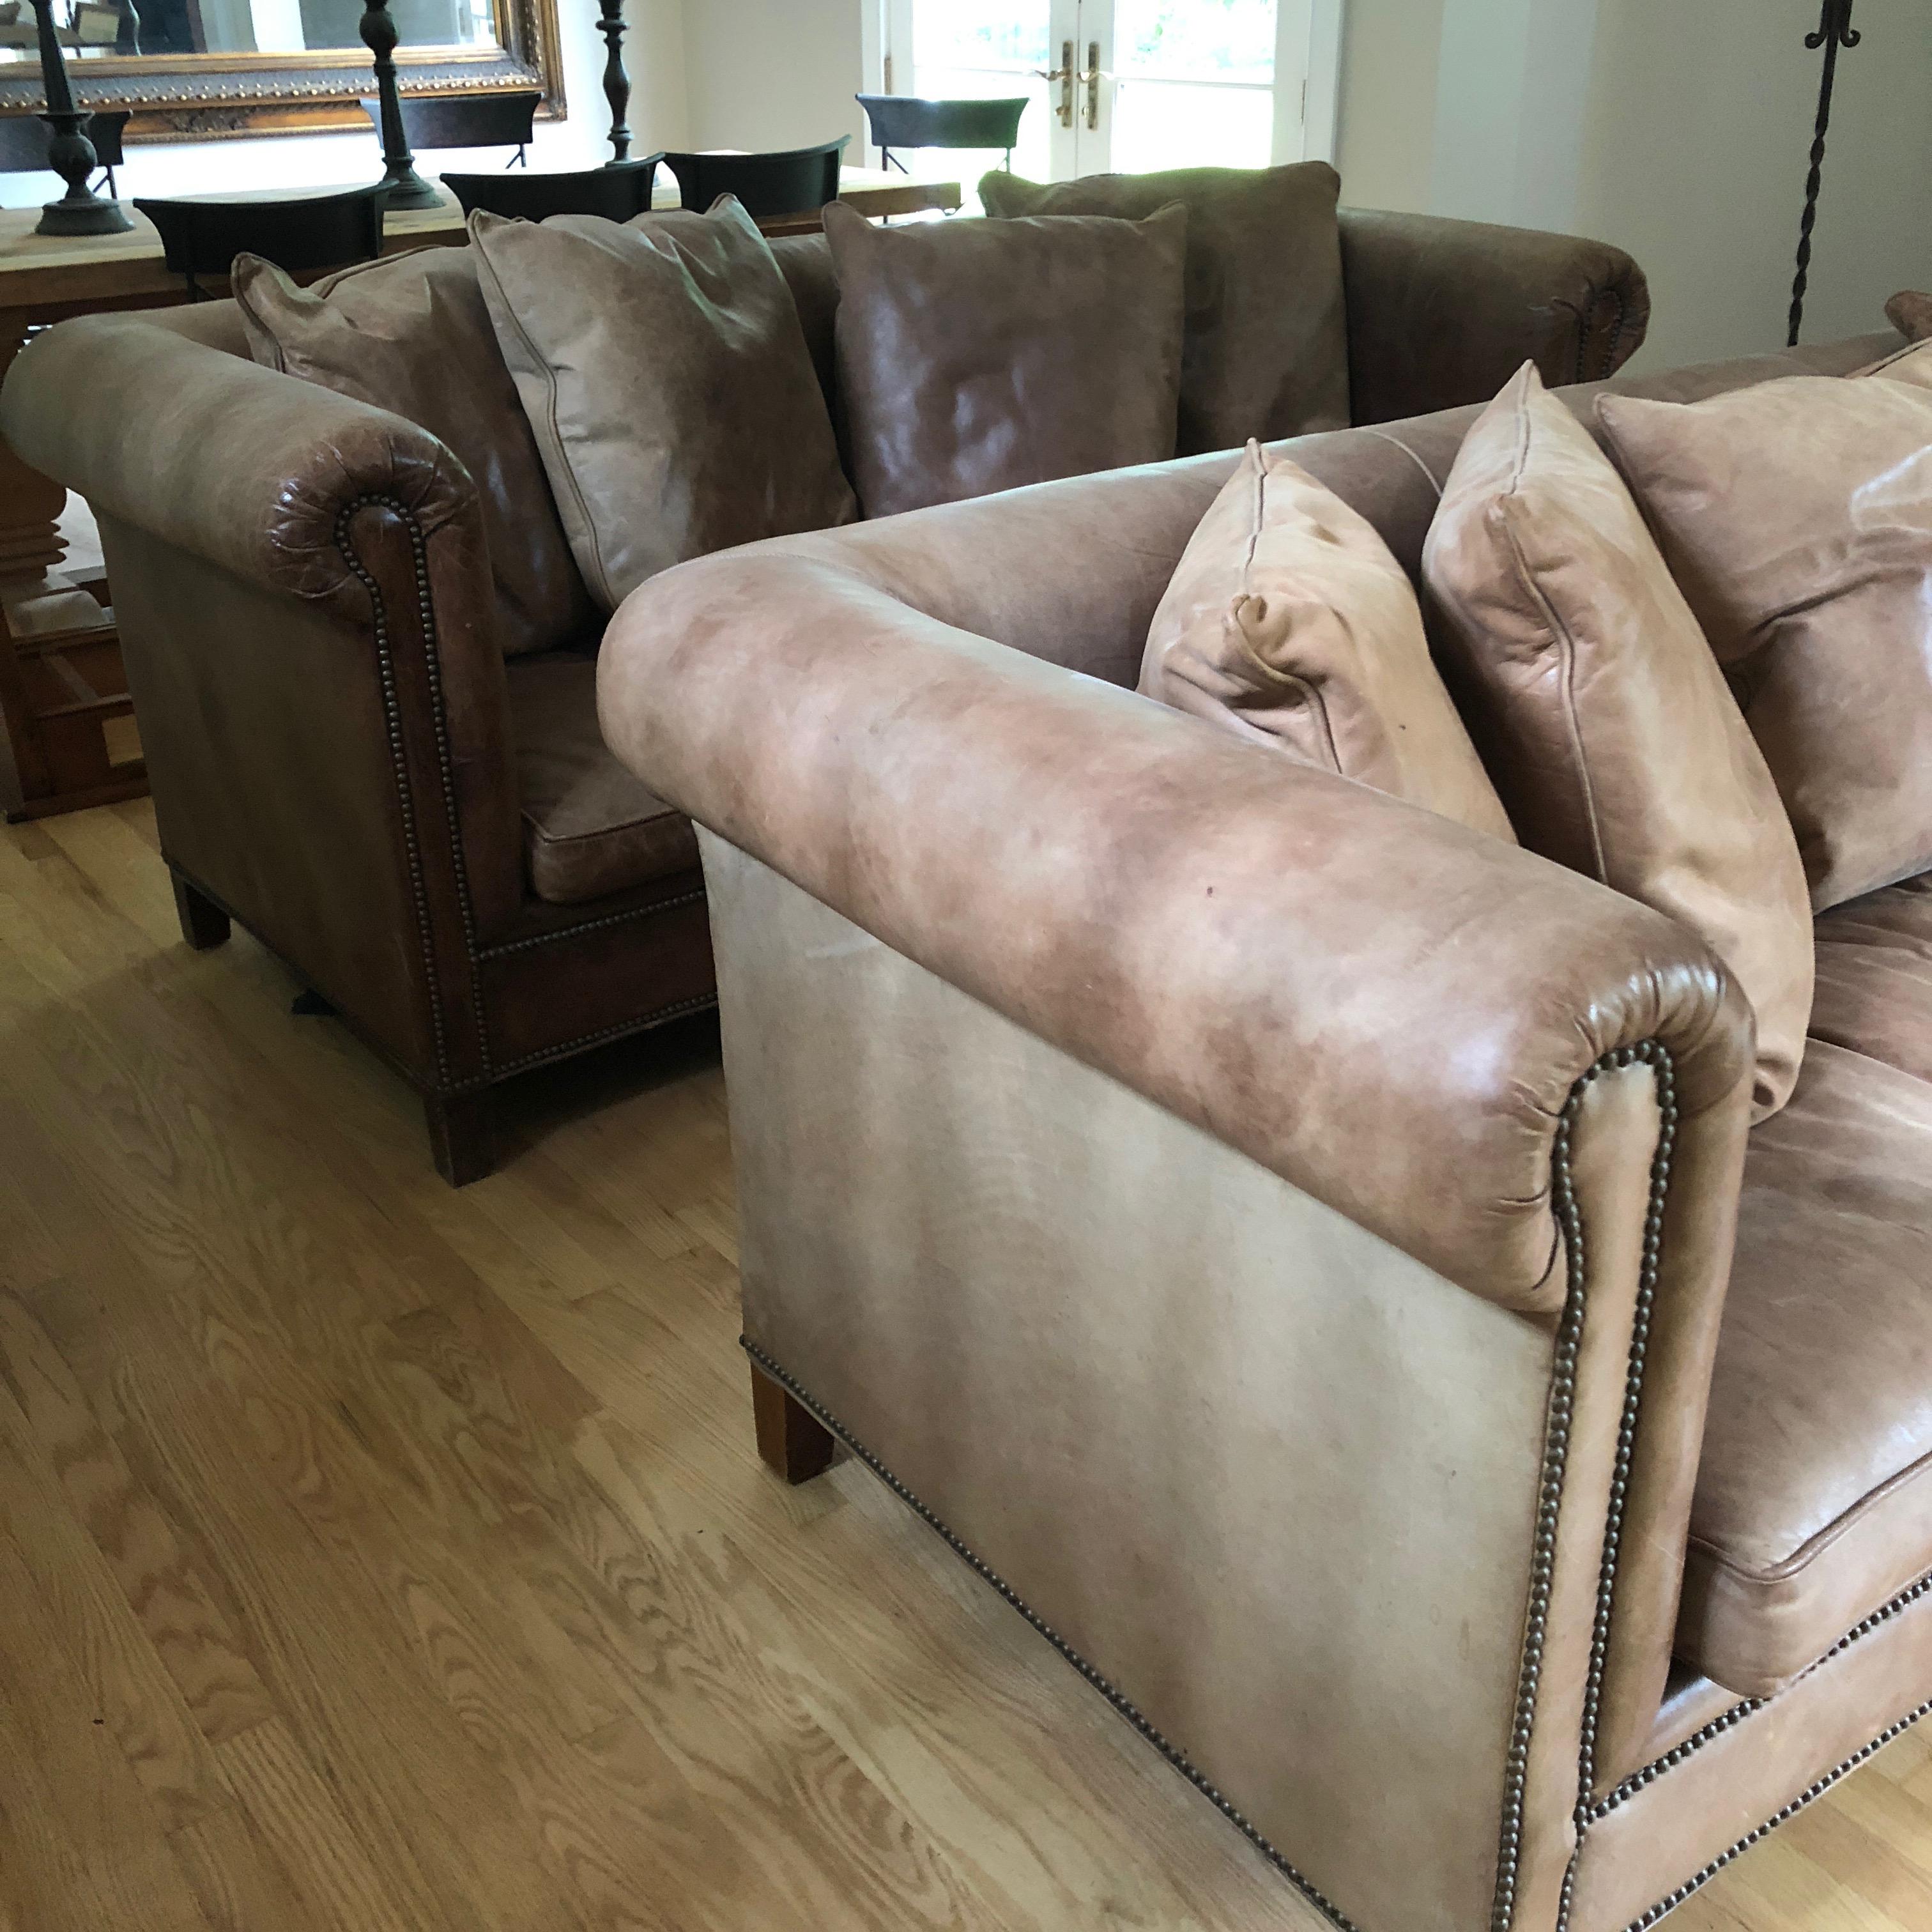 Two fabulous slightly distressed supple soft leather Ralph Lauren sofas having down seat cushions and 4 pillows each. As is customary with leather, one is a slightly different shade of brownish taupe than the other.
Note: Will split the pair. A